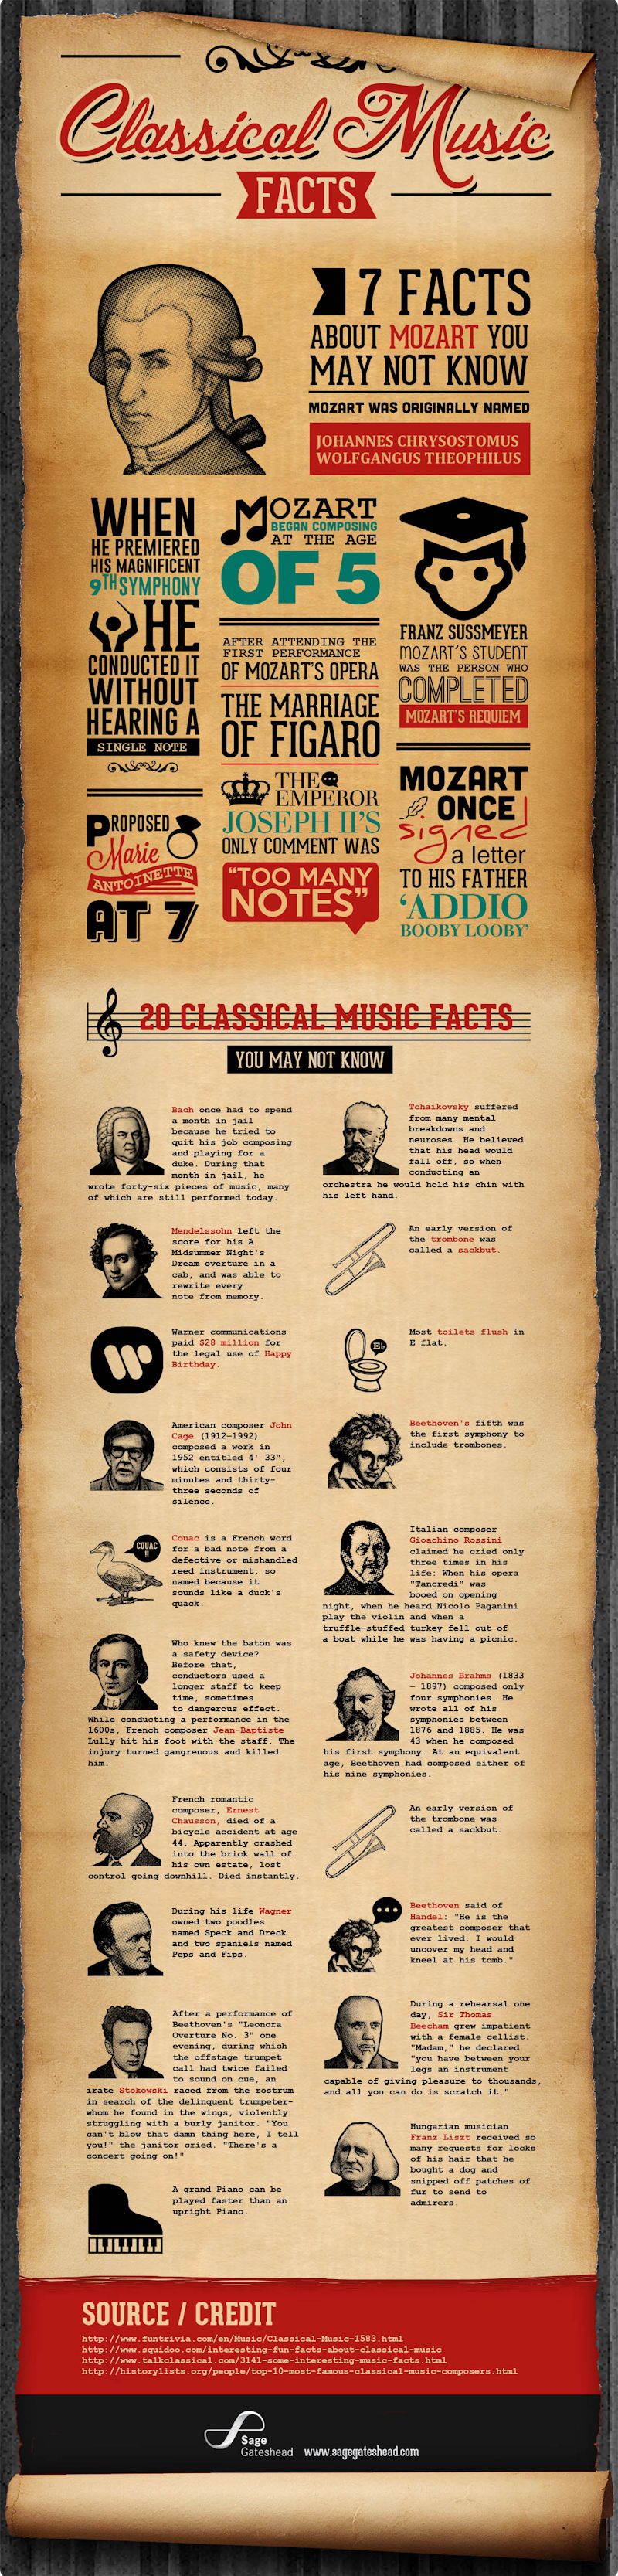 27 Interesting Classical Music Facts